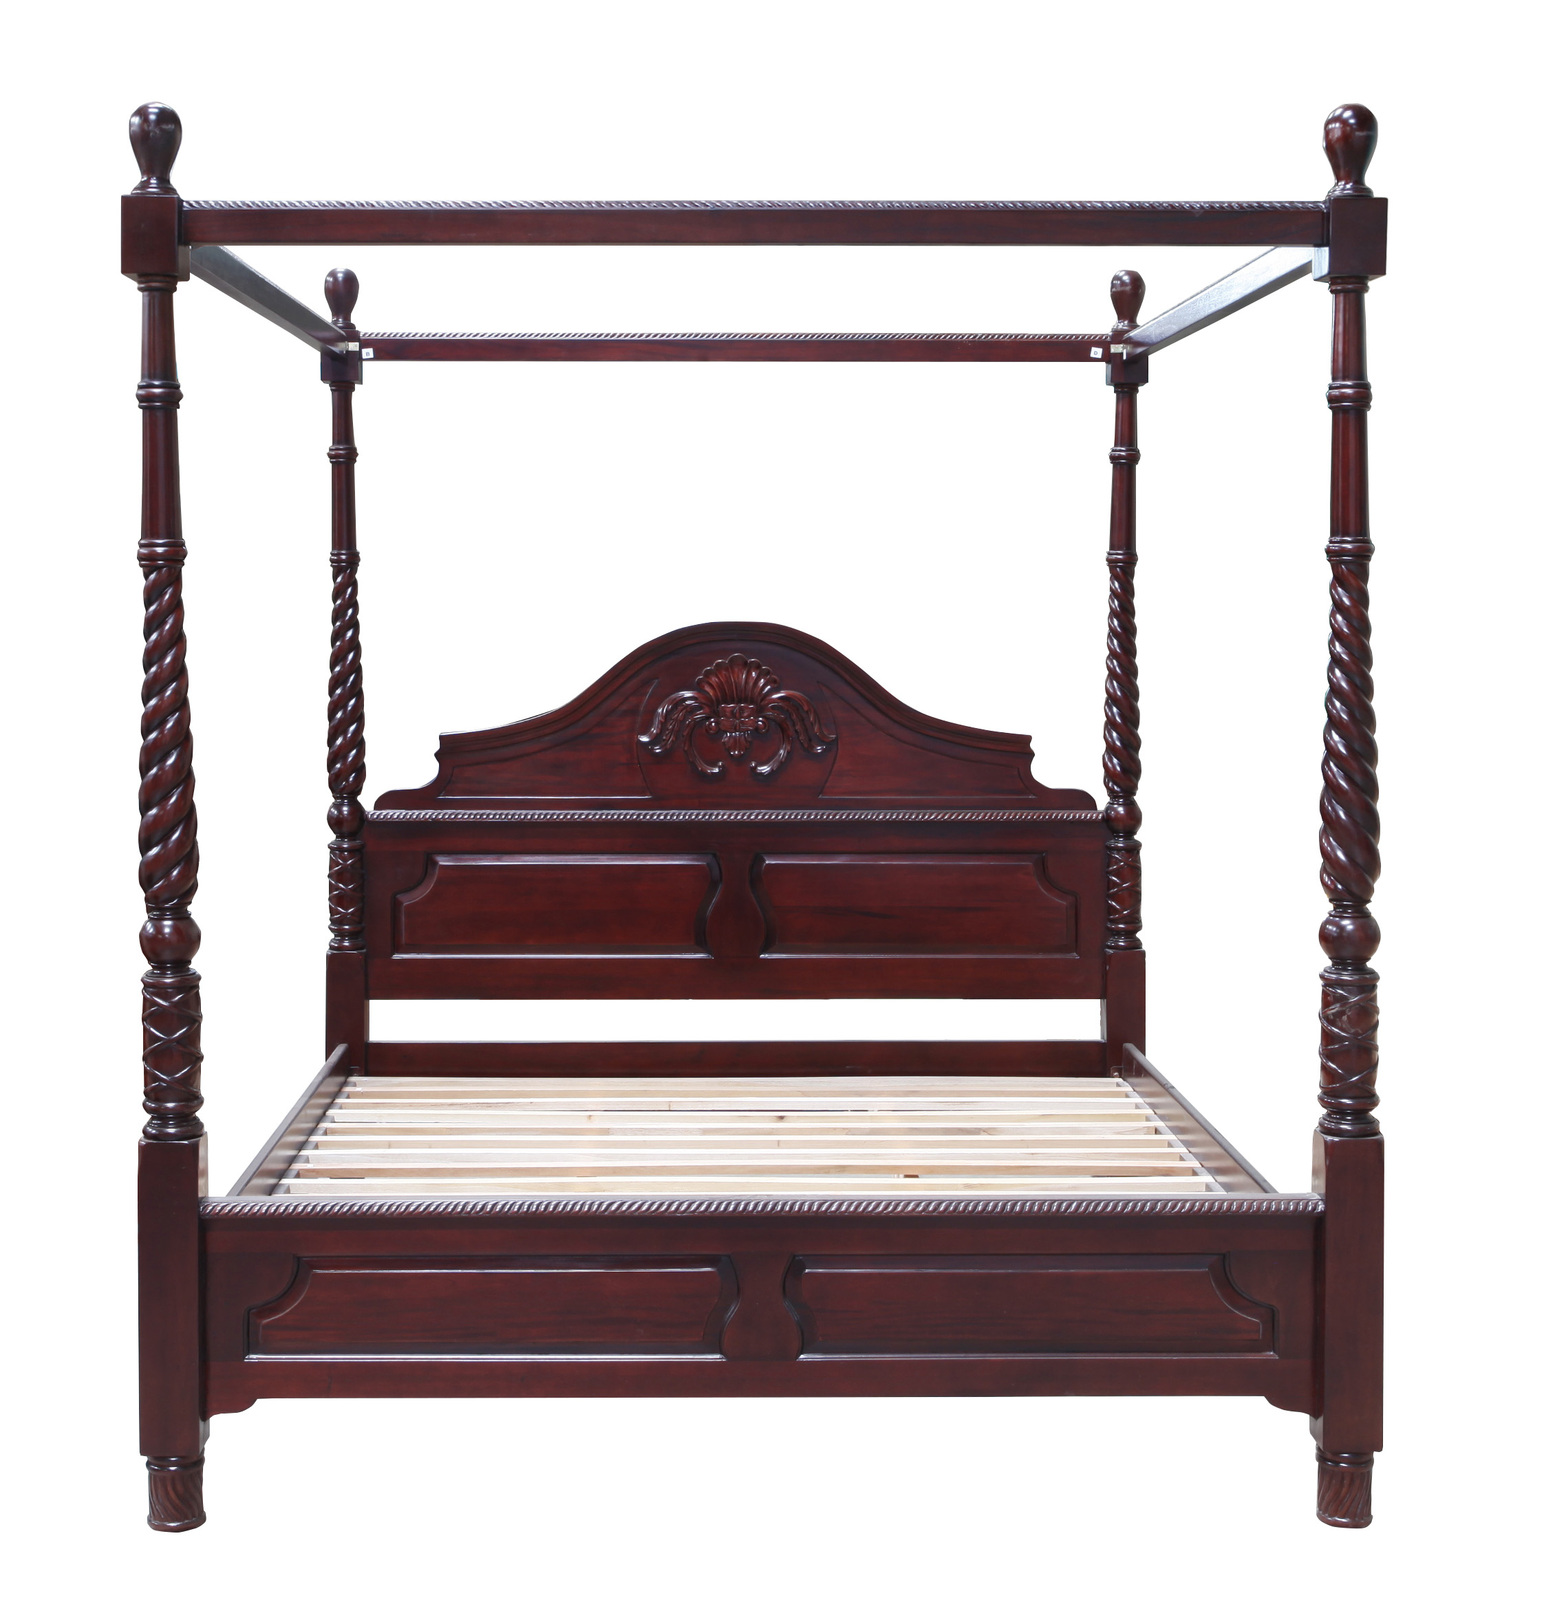 Mahogany Wood Chunky 4 Poster King Bed, Wood Canopy Bed Frame King